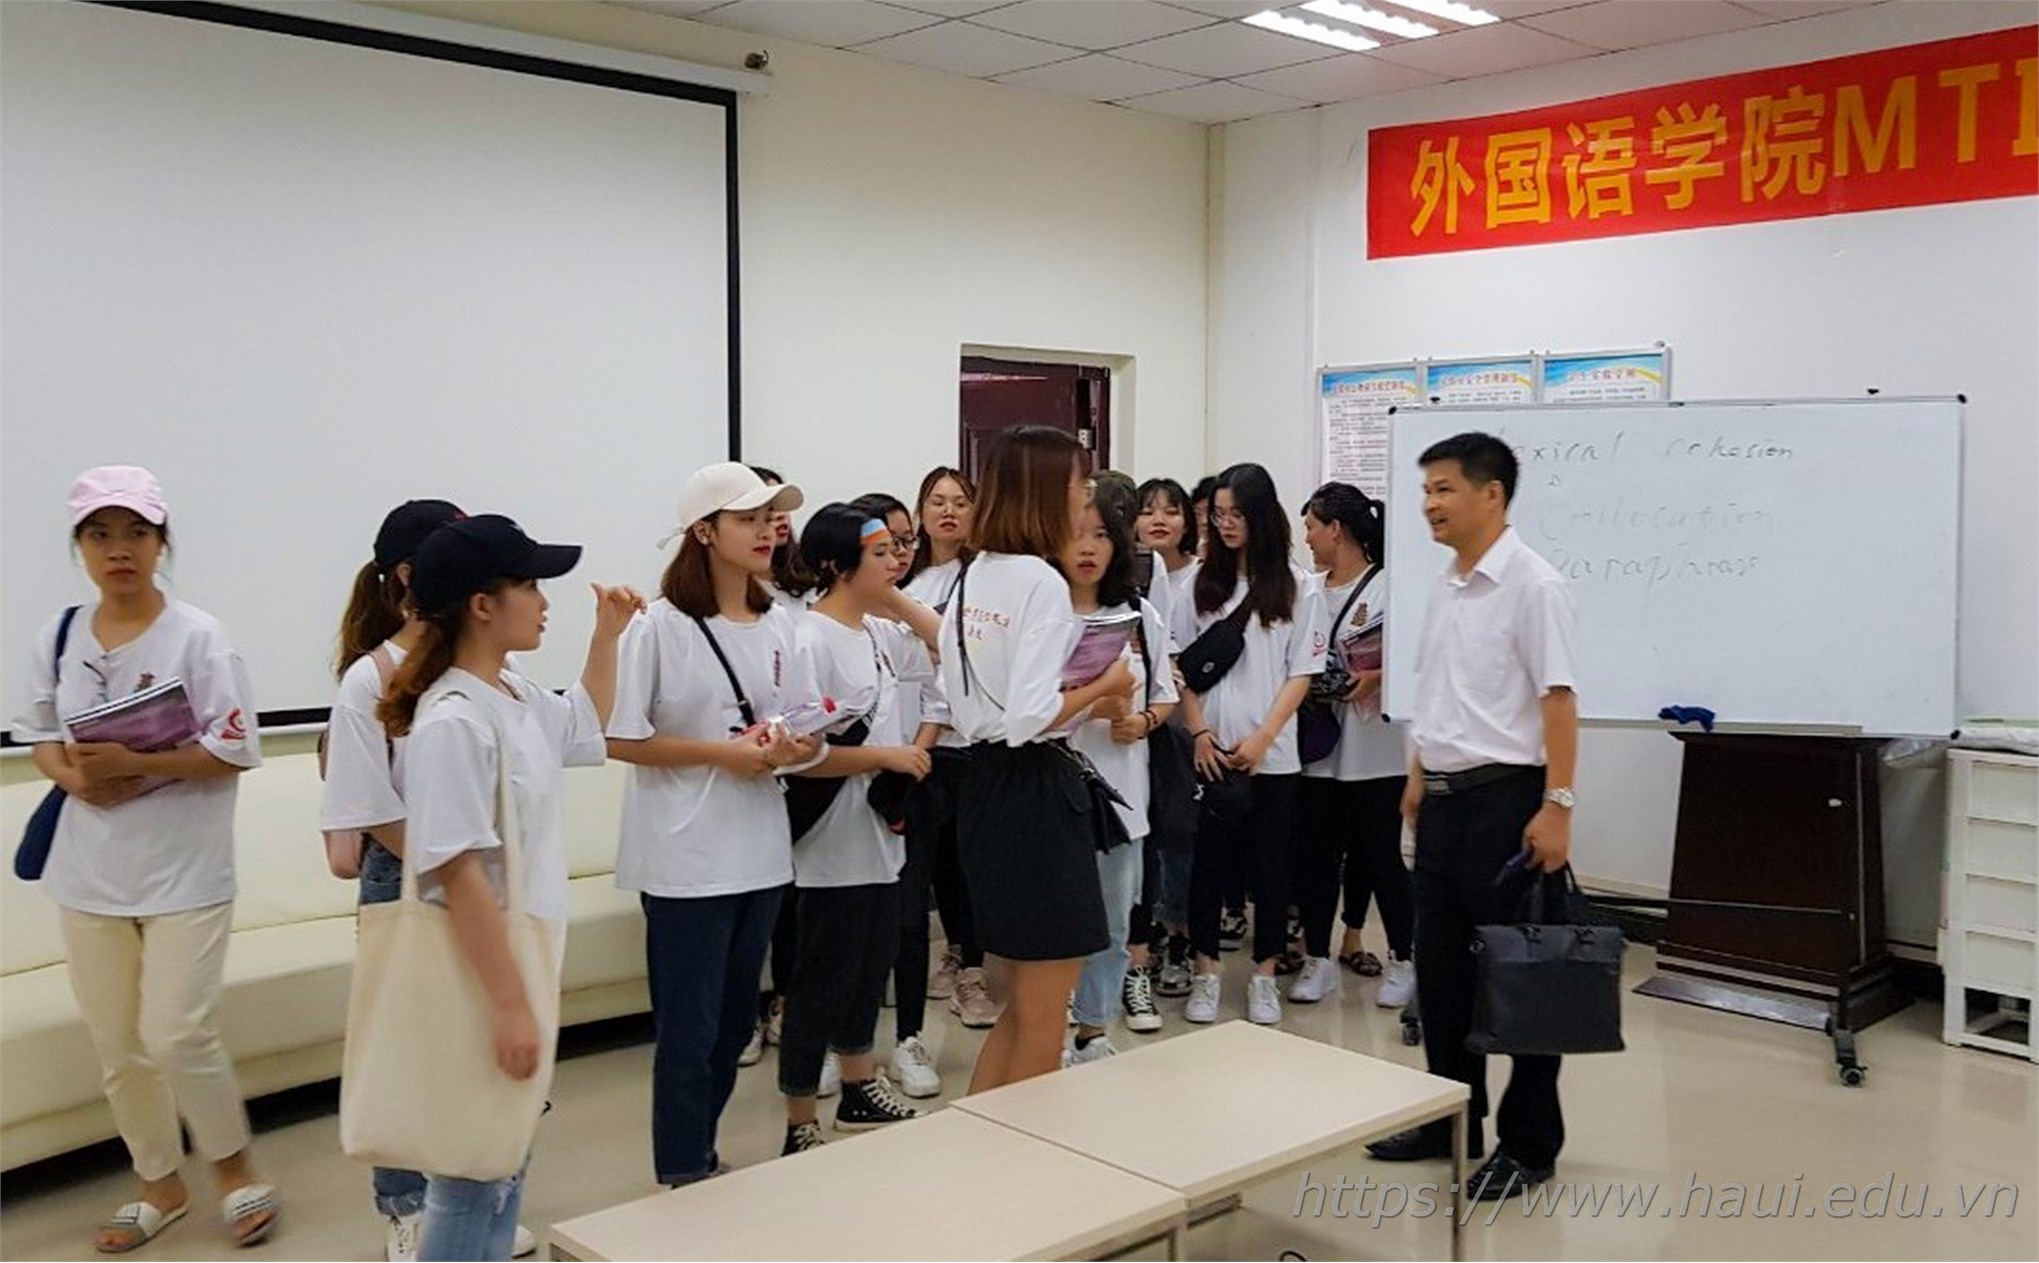 60 HaUI students participate in the student exchange program at Guangxi University of Science and Technology, China